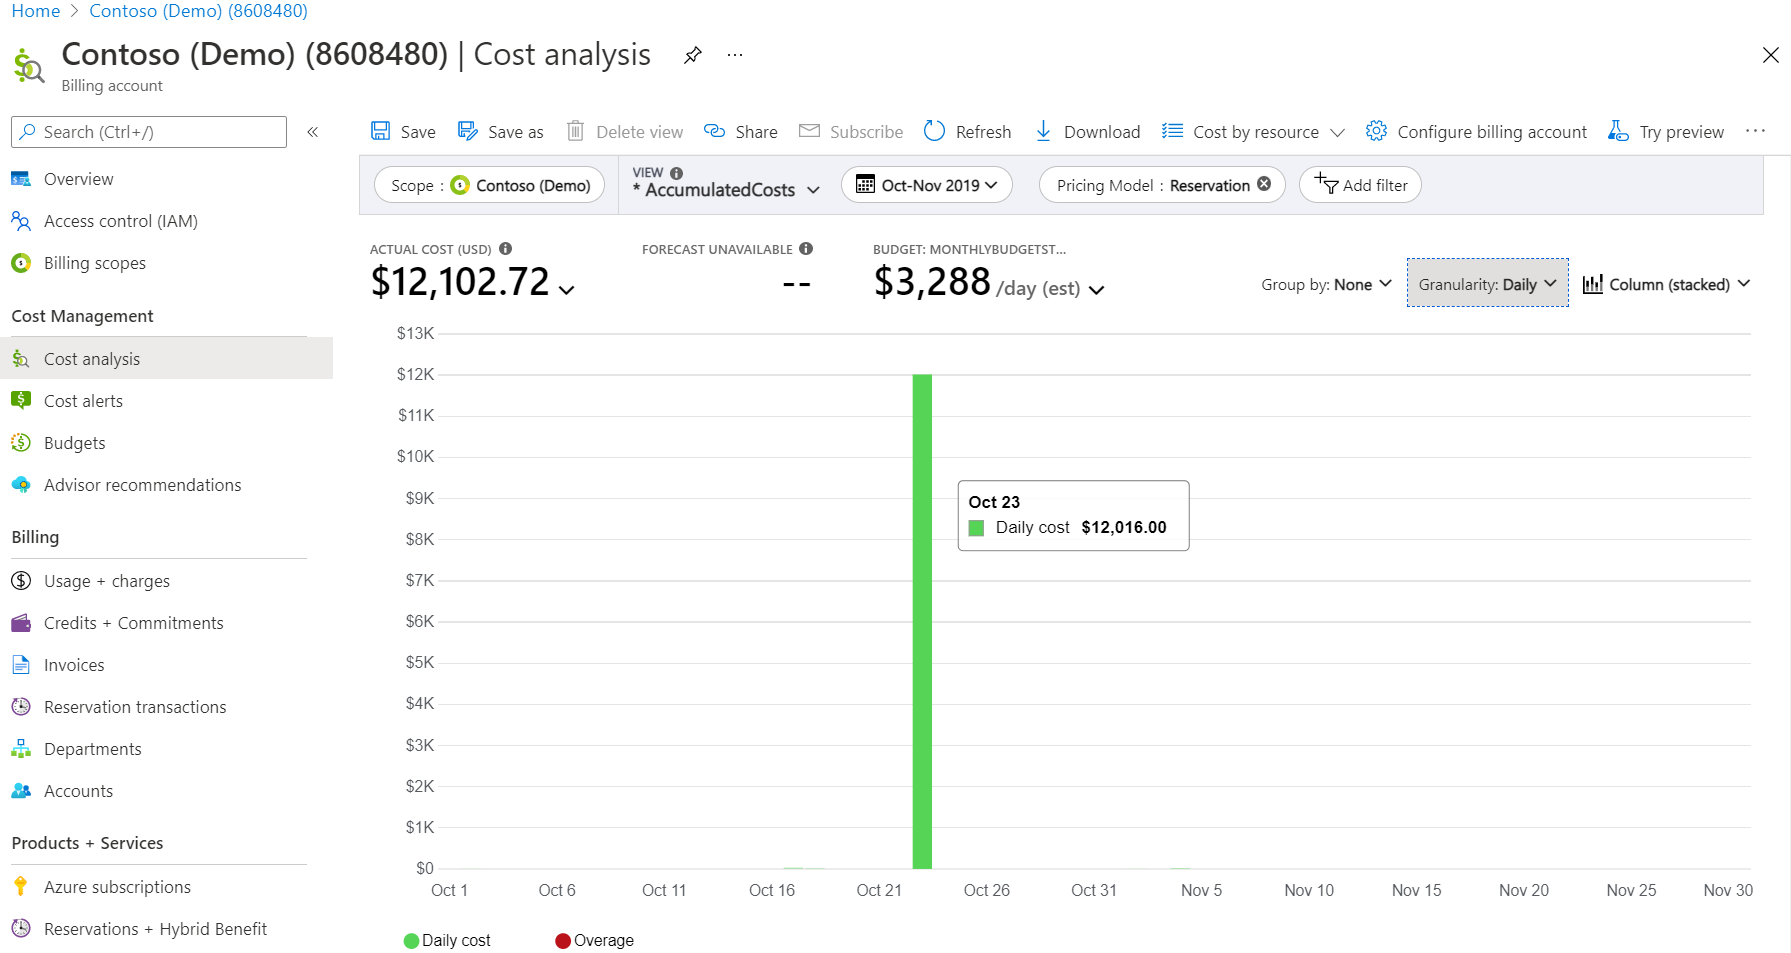 Screenshot showing a reservation purchase in Cost analysis.